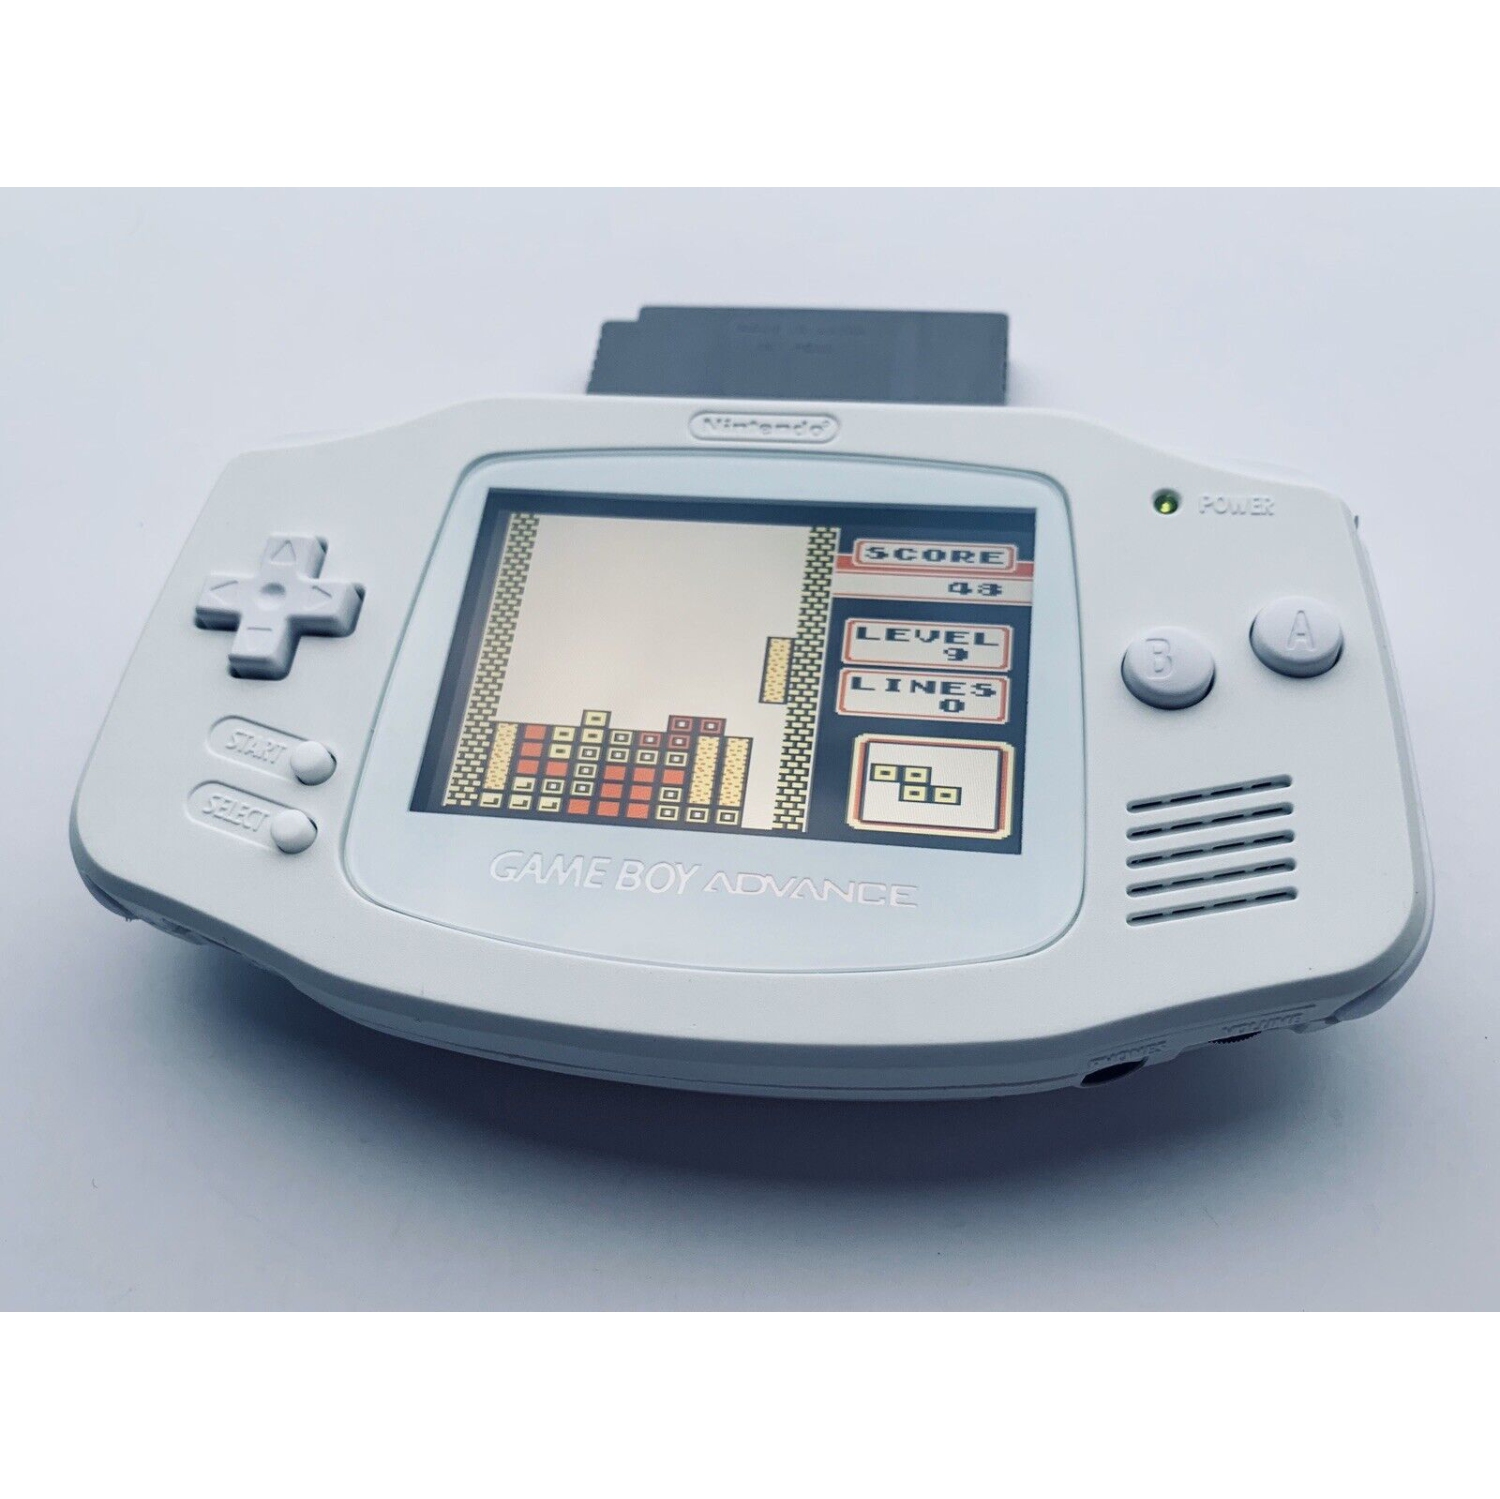 Authentic Refurbished Excellent Nintendo Gameboy Advance GBA White Handheld Gaming BACKLIT IPS And USB-C Rechargeable Battery